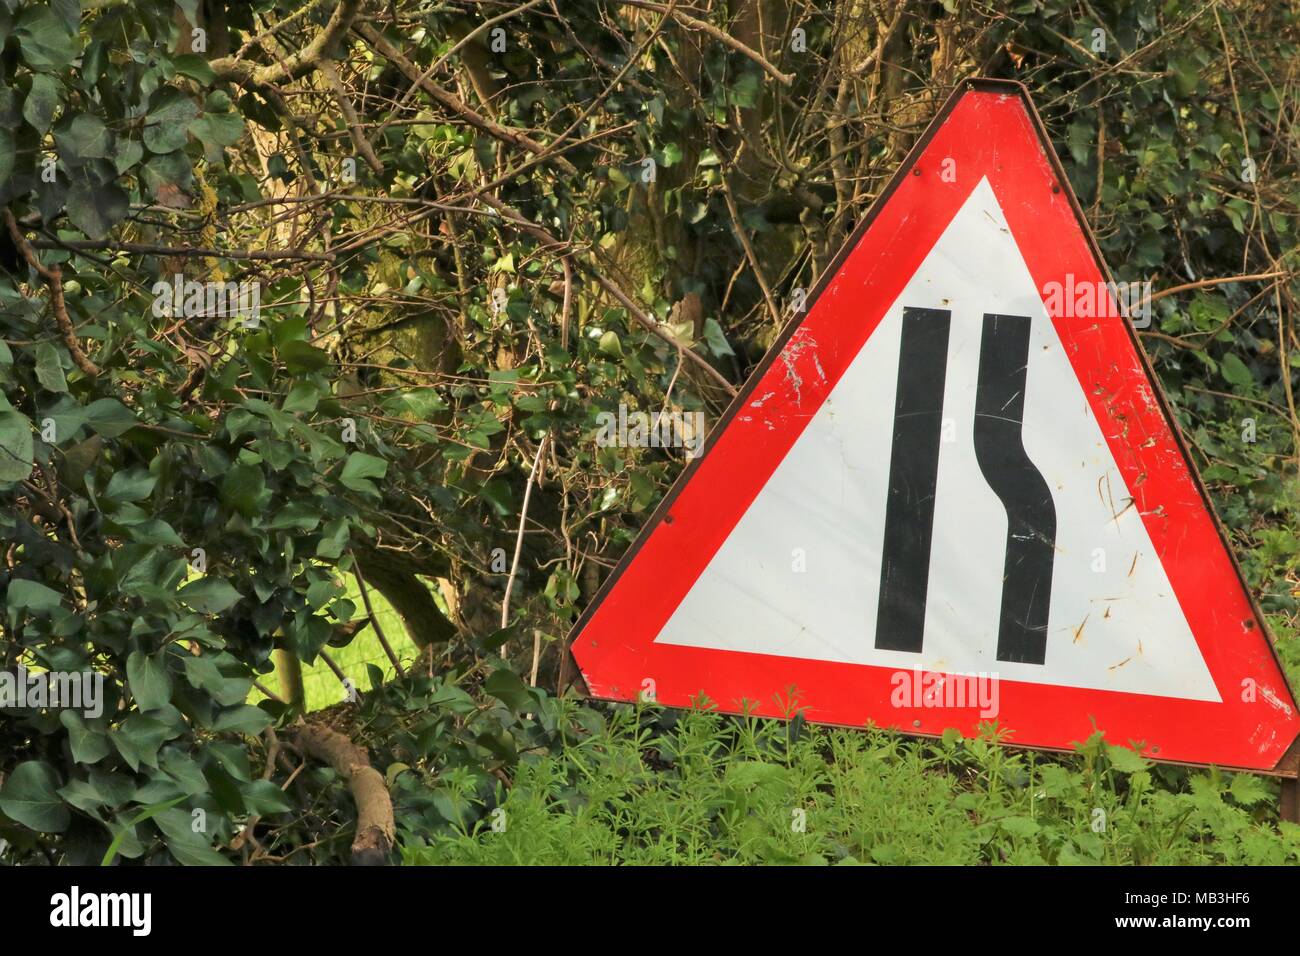 Red border triangle road sign at side of the road showing narrow right side of road for traffic Stock Photo